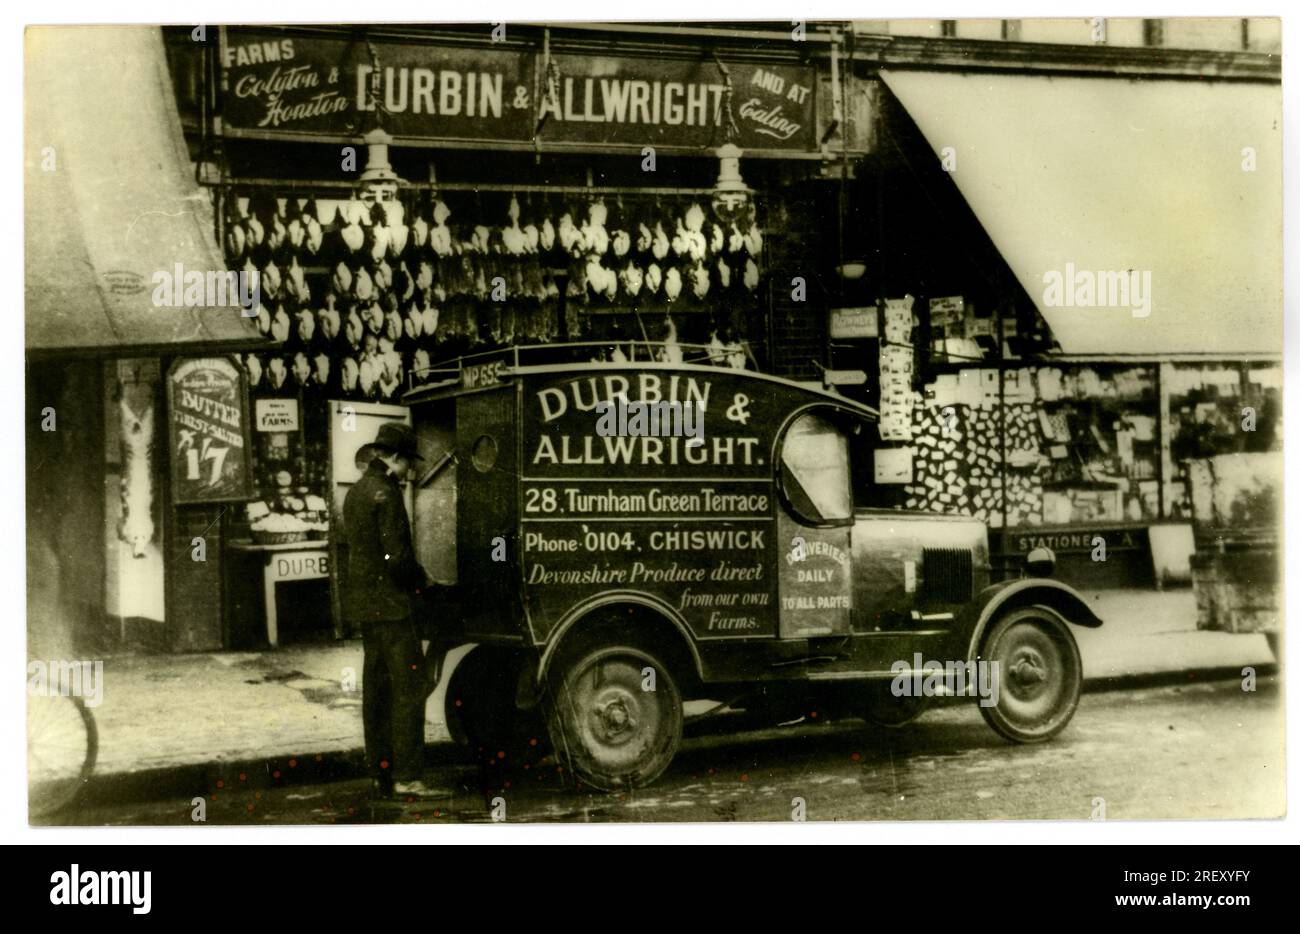 Photograph of Durbin & Allwright's  delivery van and driver, outside their shop selling fresh produce direct from their own Devonshire farms at Honiton and Colyton. This shopfront has chickens, rabbits and butter on display.  This shop was at Turnham Green Terrace, Chiswick, London, U.K. There was another shop at Ealing, London. Circa 1930. Stock Photo